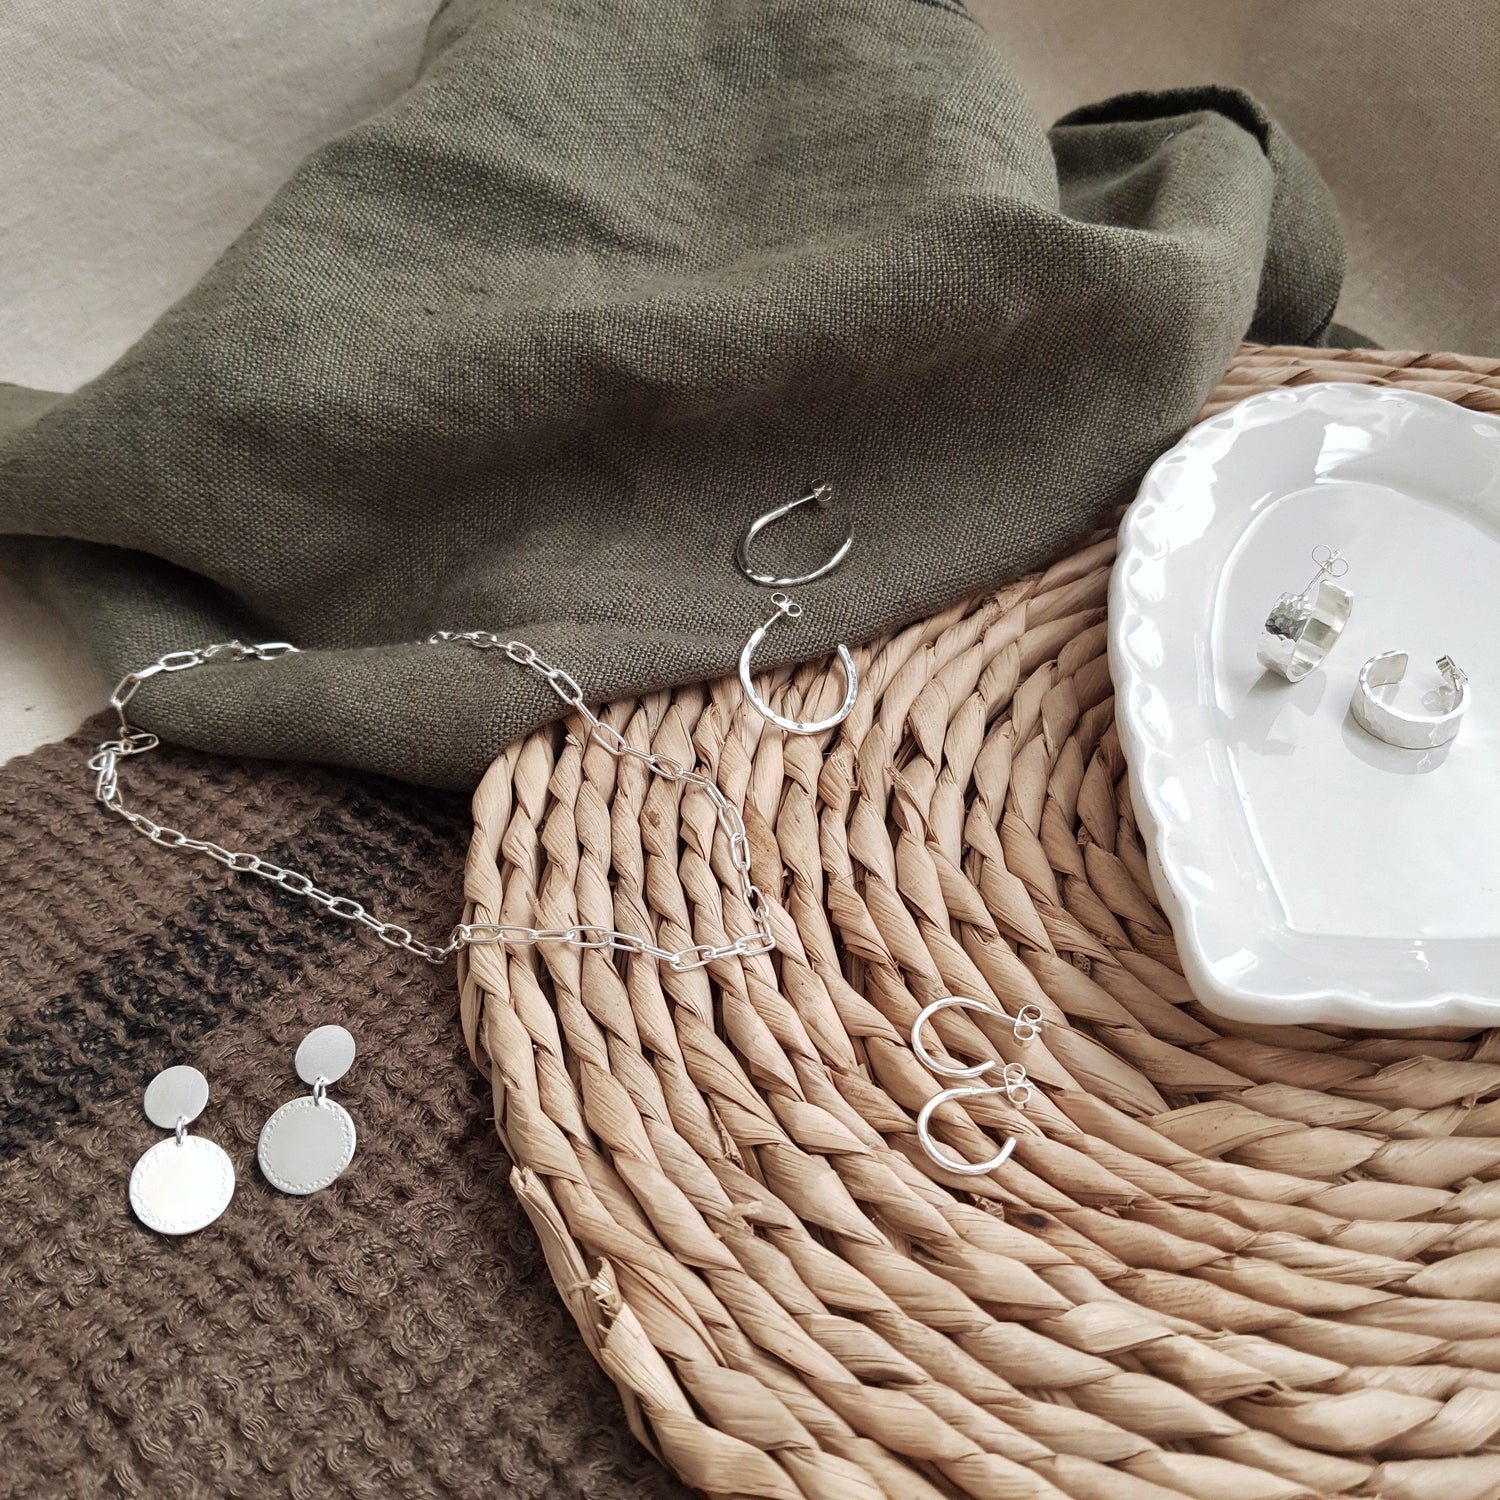 hammered silver jewellery, hoop earrings and a silver chain. Handmade silver jewellery